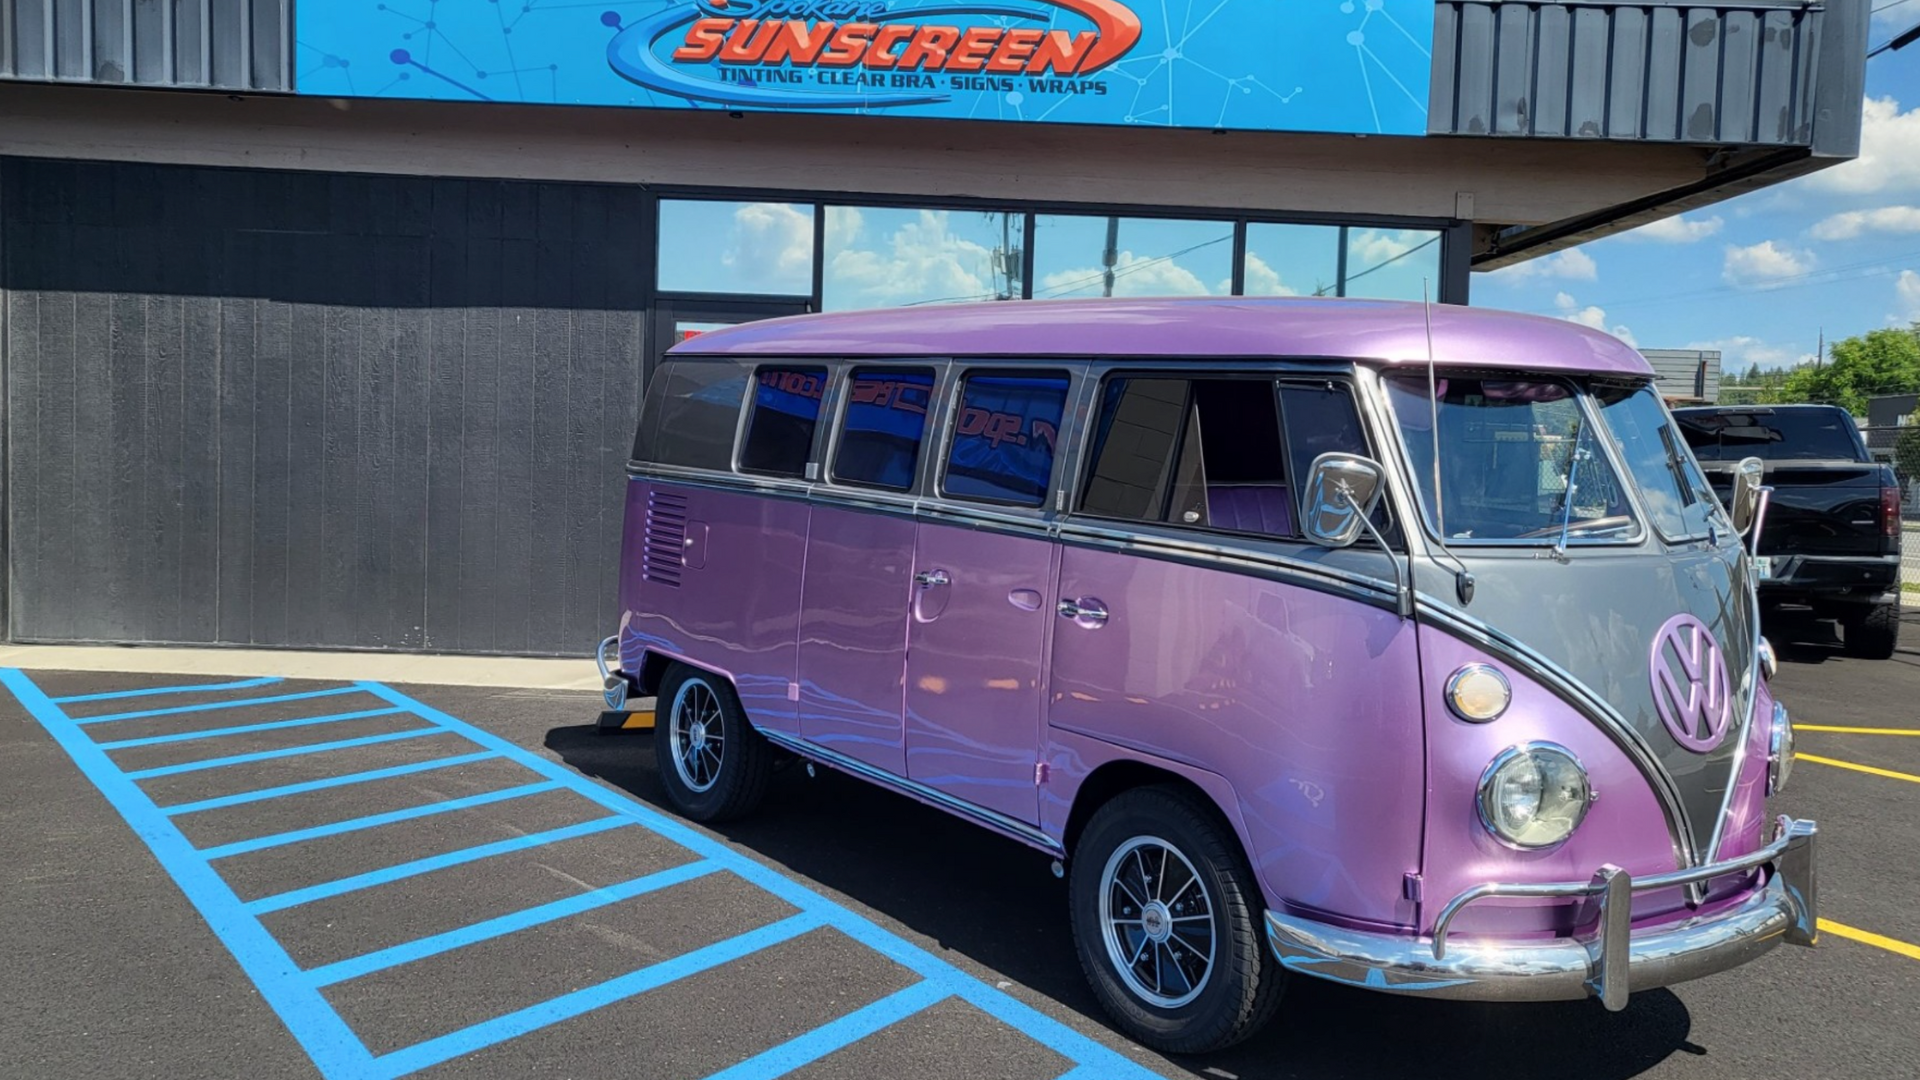 Vintage purple and white Volkswagen bus parked outside Spokane Sunscreen with clear blue skies overhead.